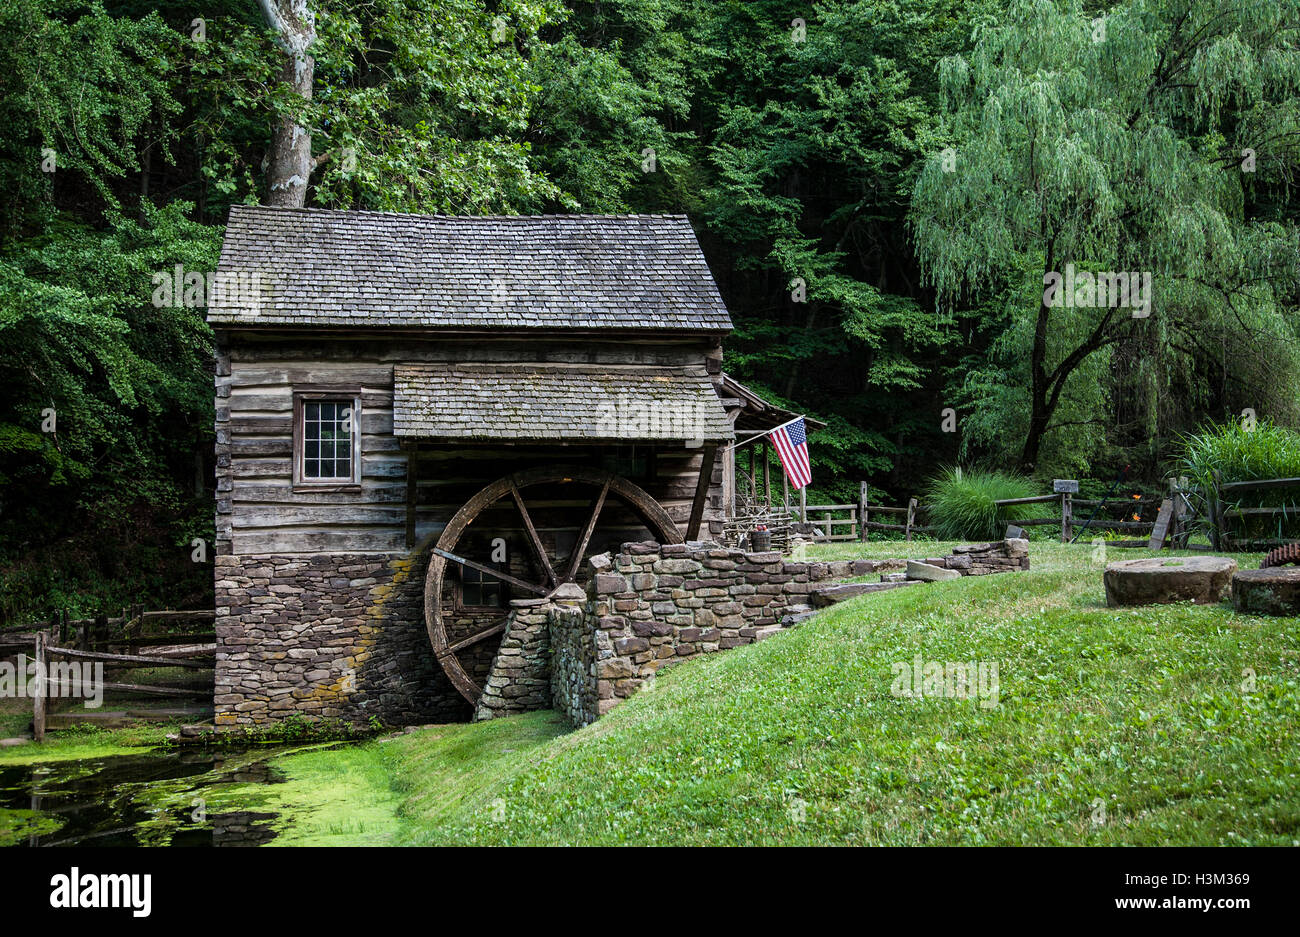 Historic Cuttalossa farm and gristmill cabin in the woods, Bucks County, Pennsylvania, PA  USA, old country farm historic house, historical images Stock Photo